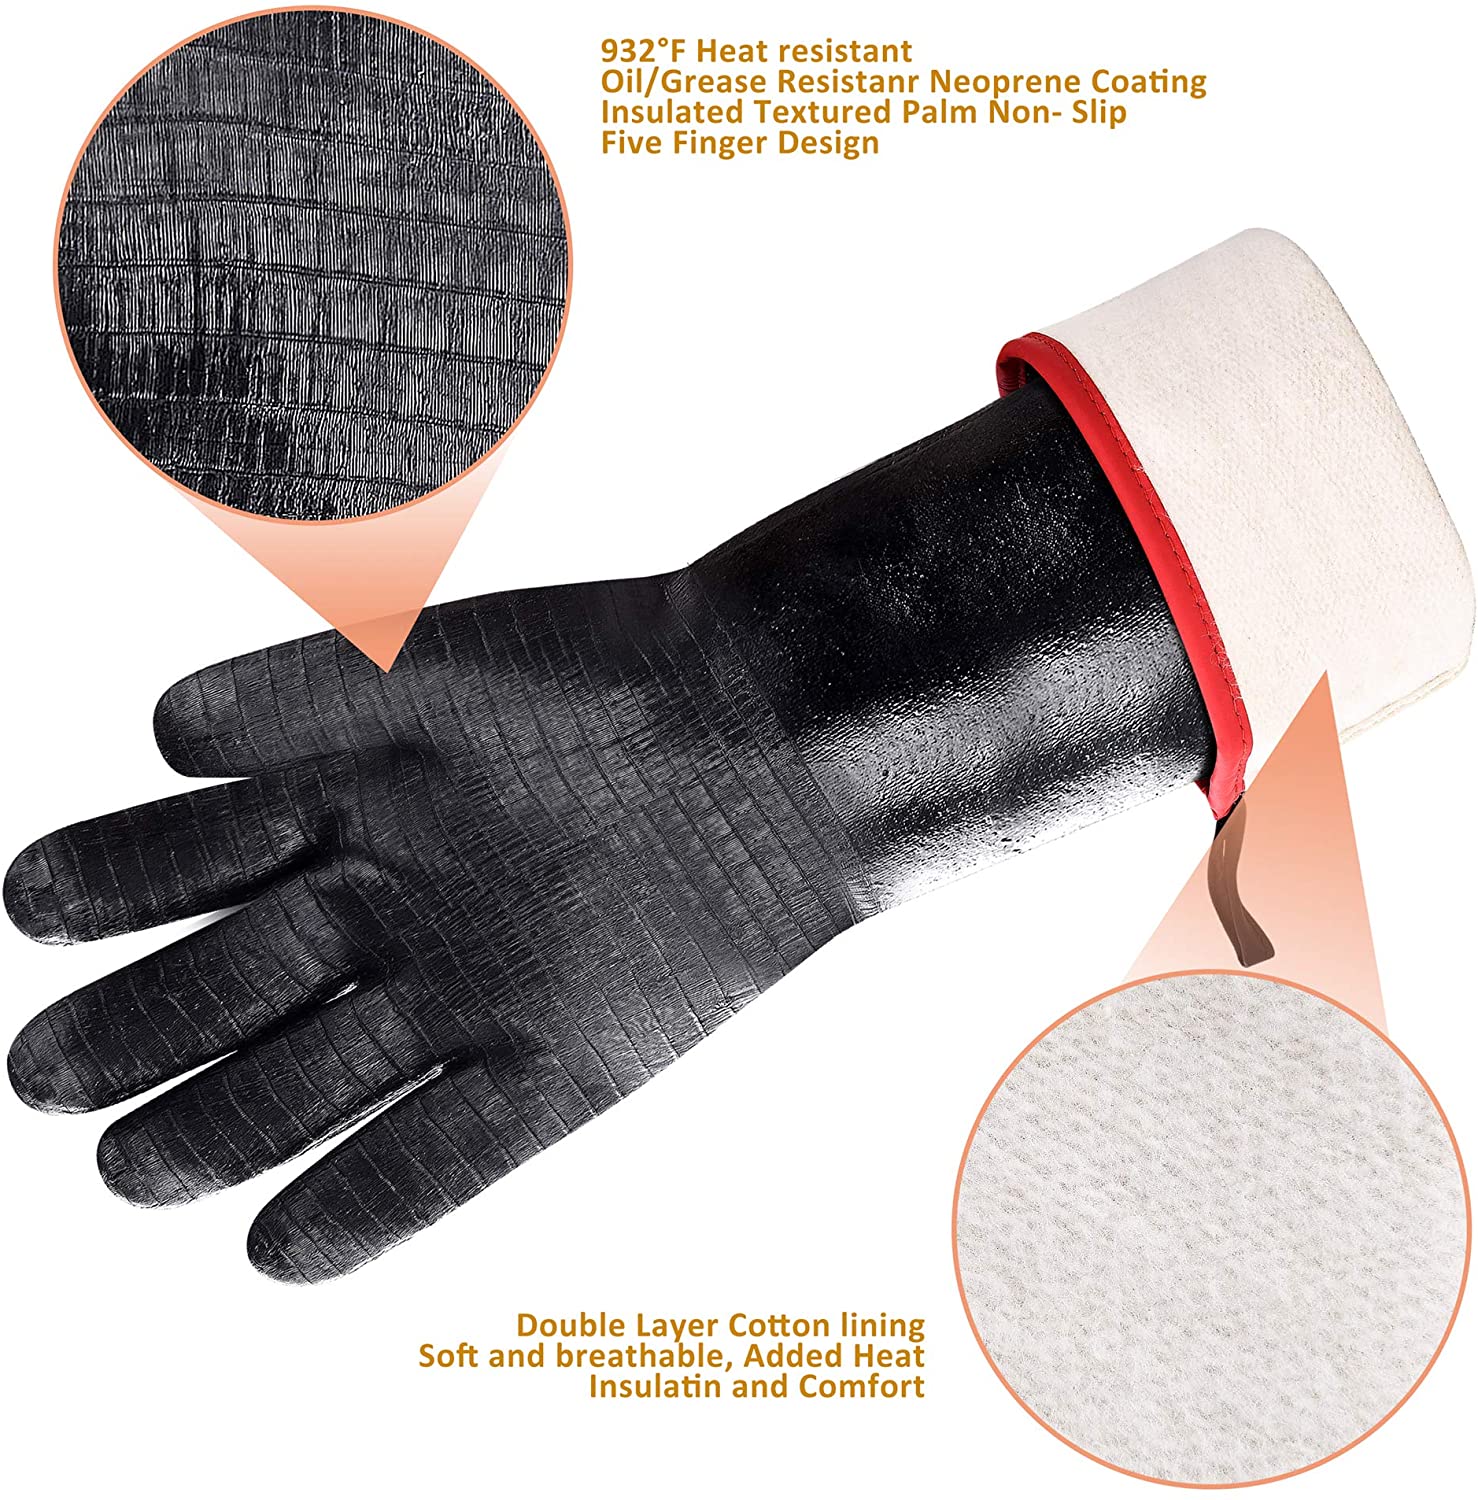 Heat Resistant-Smoker BBQ Gloves 14 Inches,932℉, Grill, Cooking Barbecue Gloves, to Handling Heat Food Right on Your Fryer,Grill,Oven. Waterproof, Fireproof, Oil Resistant Neoprene Coating - image 3 of 7